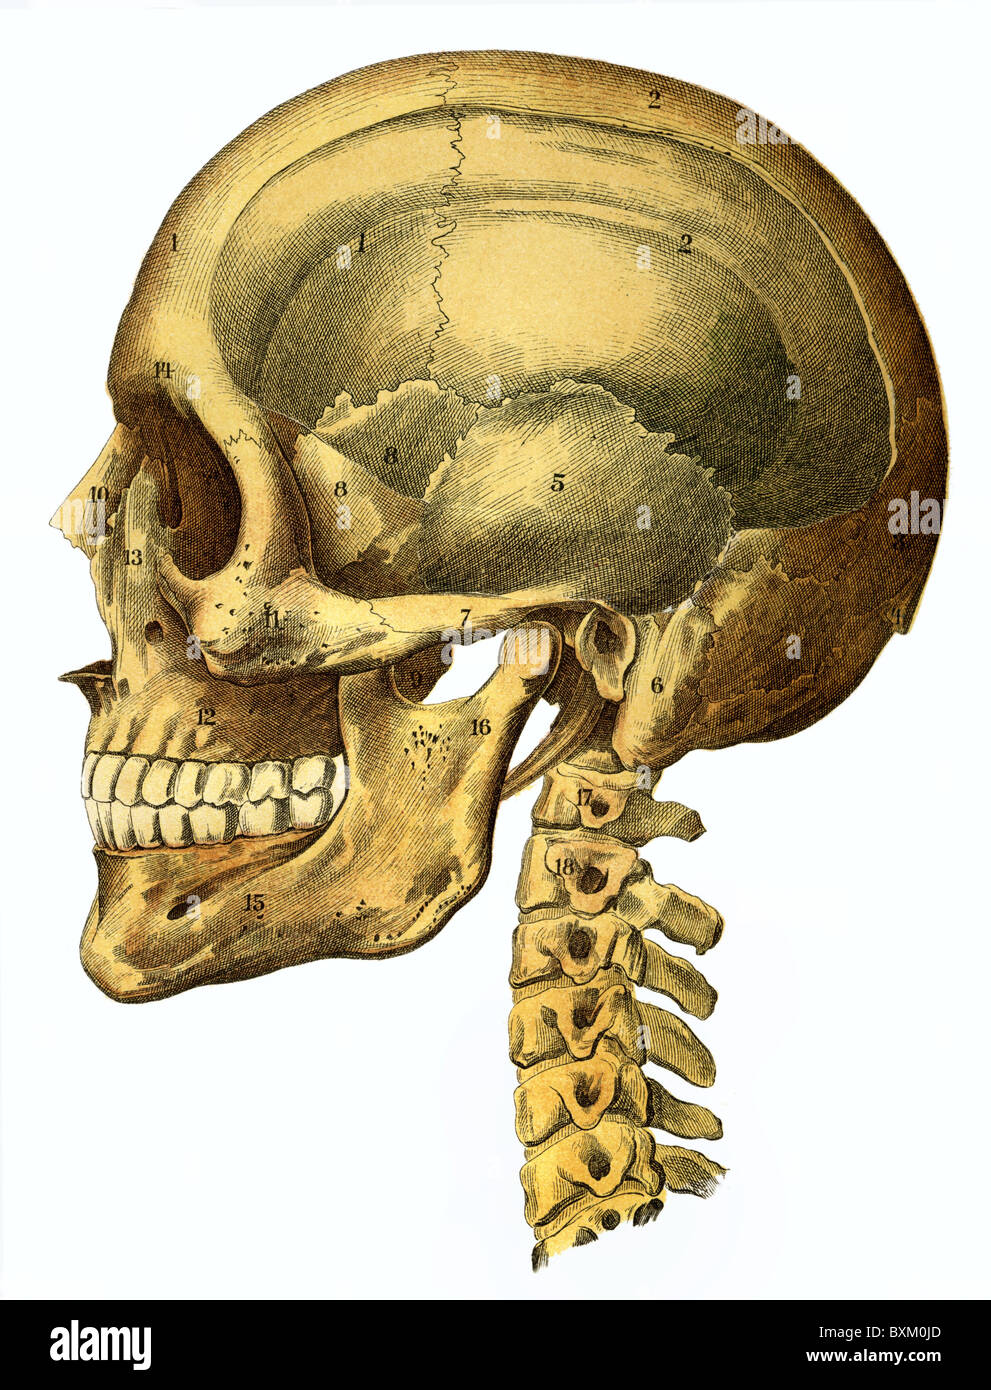 medicine, anatomy, human skull, natural example, Germany, 1900, Additional-Rights-Clearences-Not Available Stock Photo